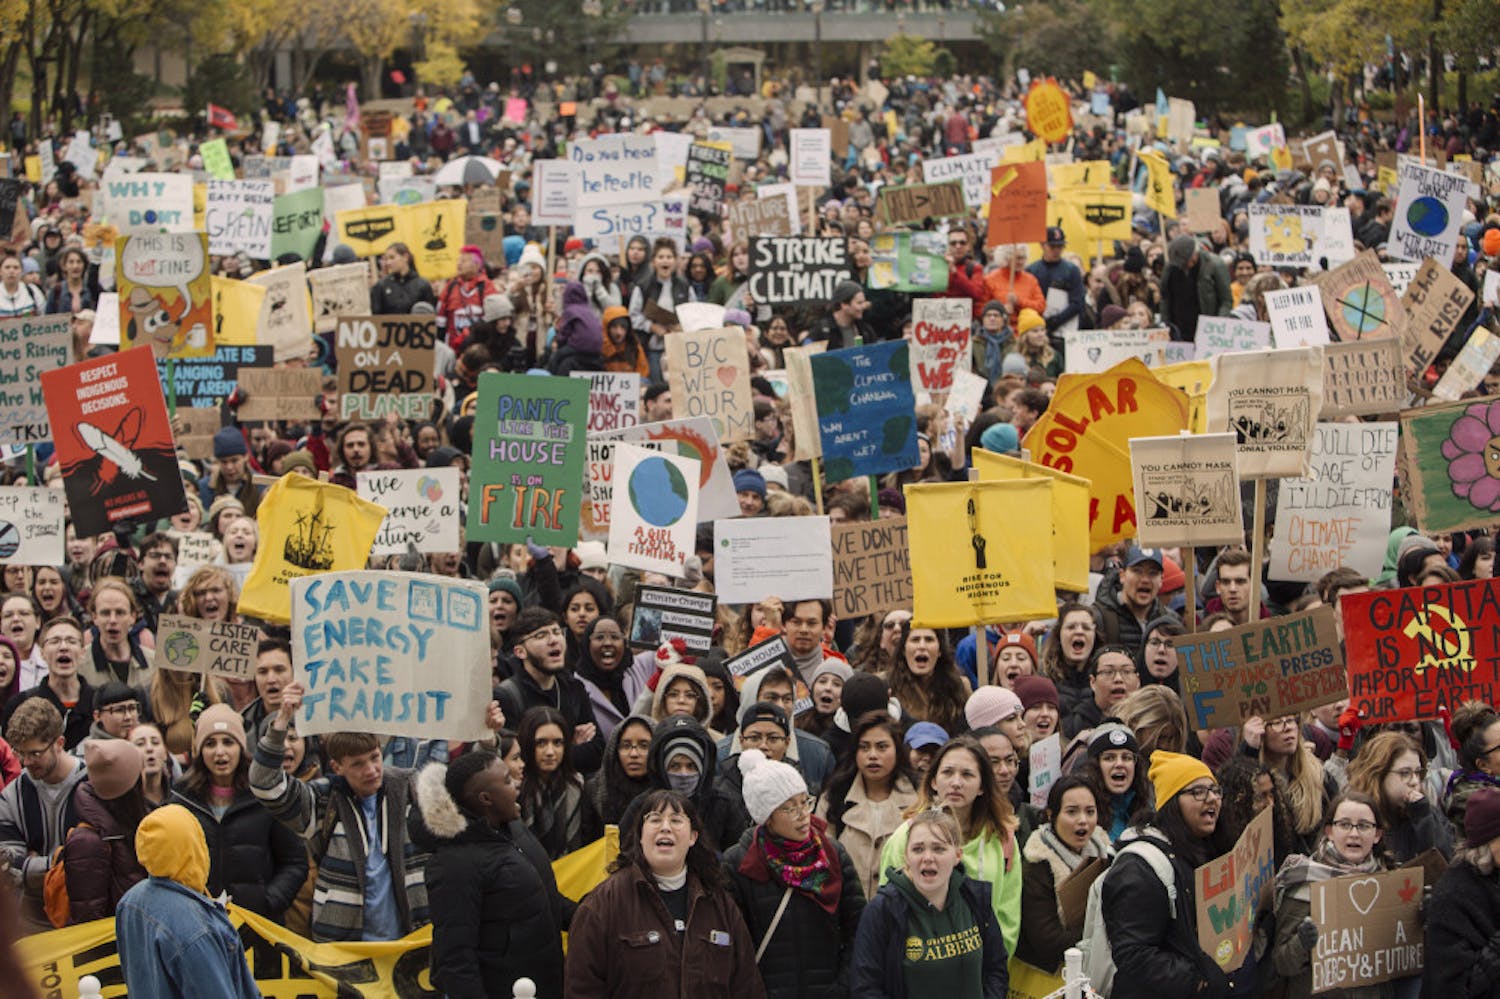 Marchers gather for the Climate Strike in Edmonton, Alberta, on Friday, Sept. 27, 2019. (Amber Bracken/The Canadian Press via AP)